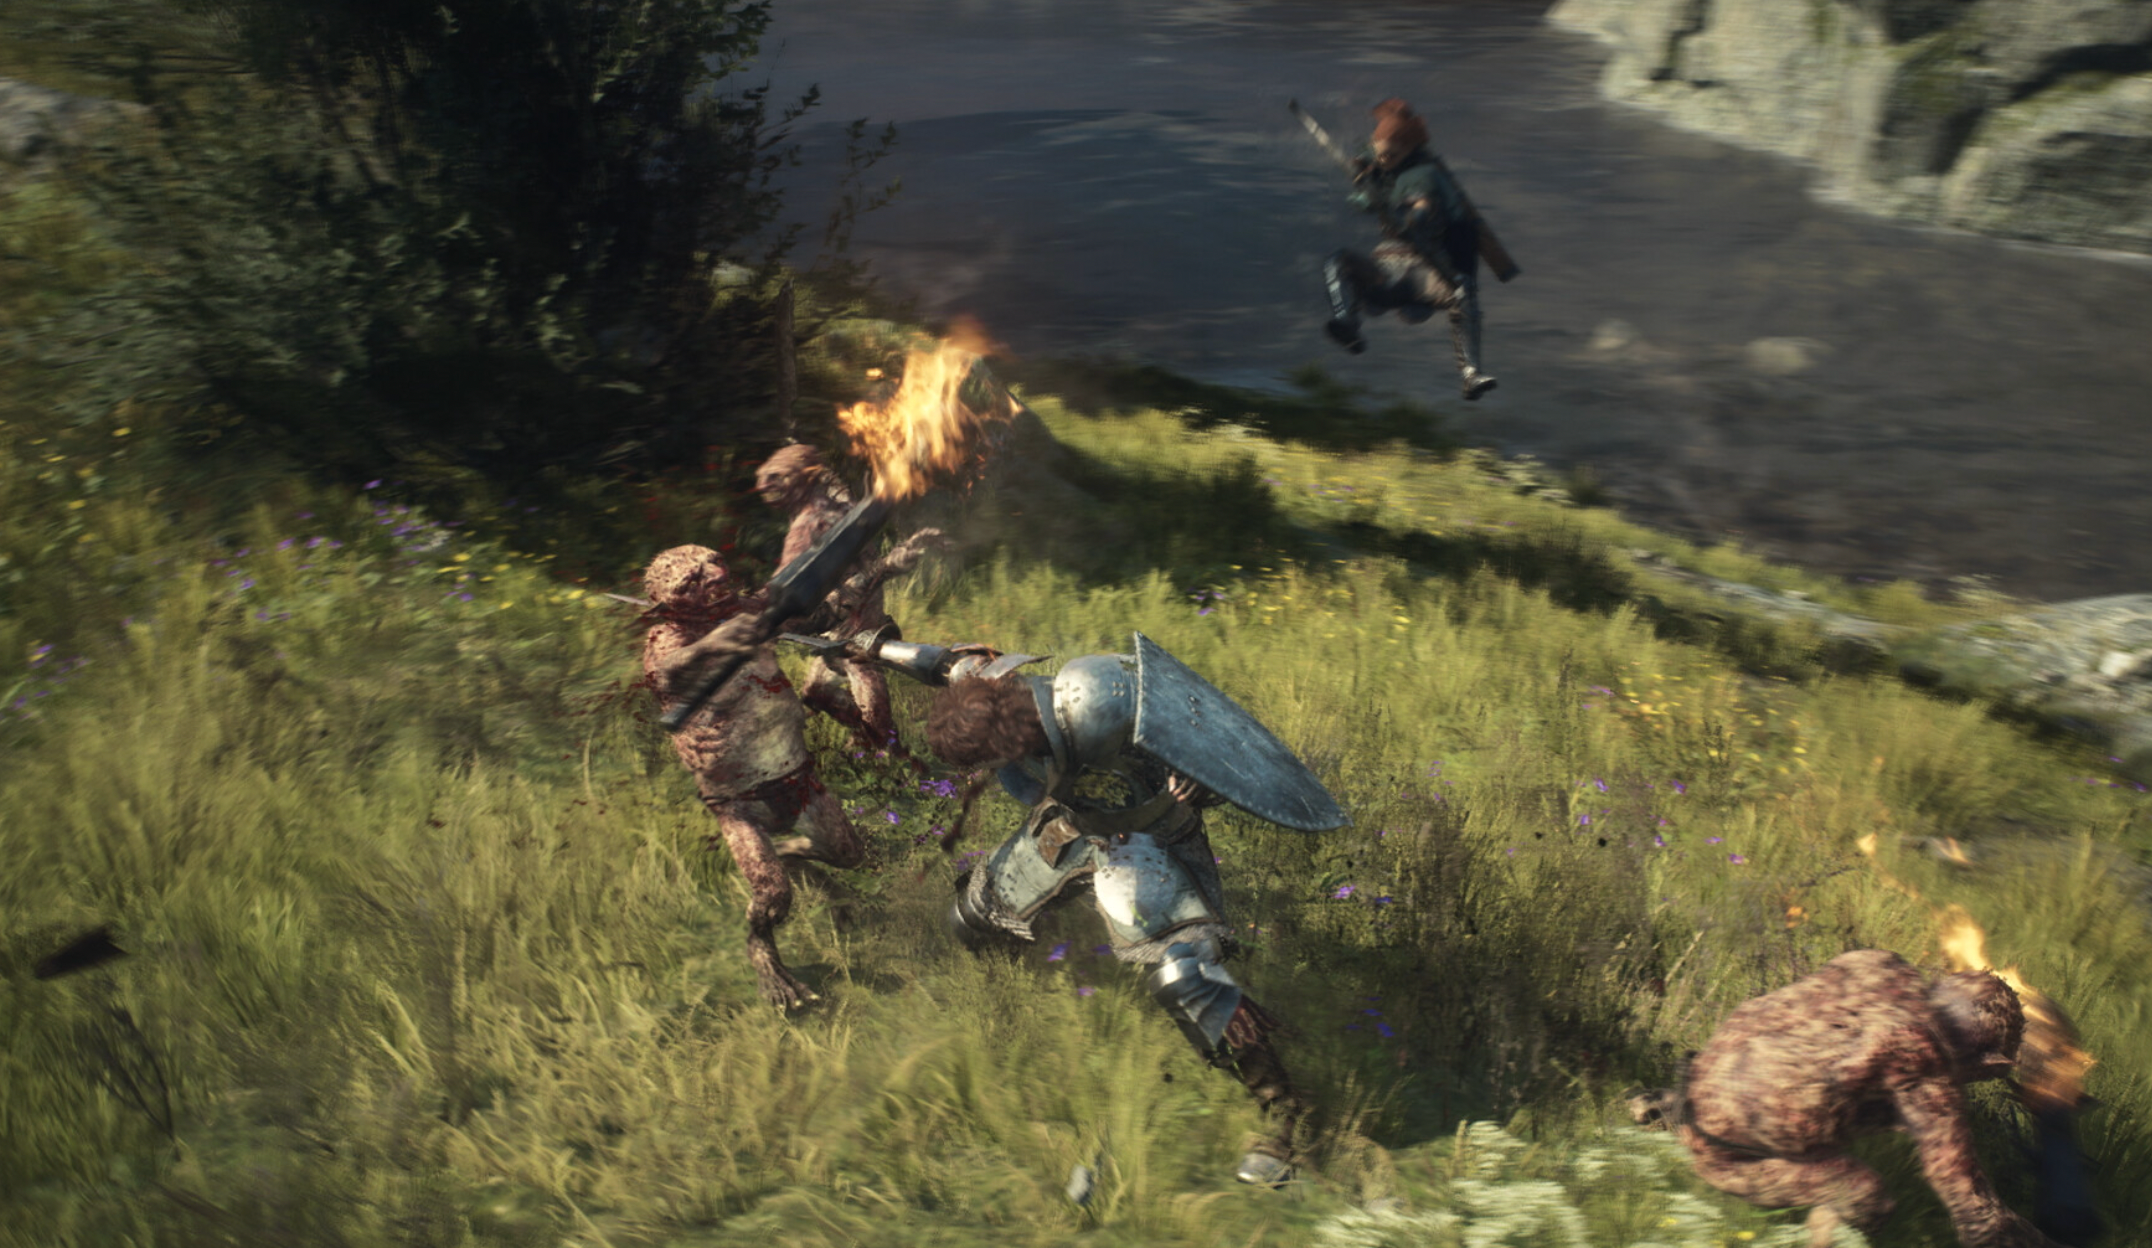 Dragon's Dogma 2 Patch 1.050 Allows Players to Start a New Game